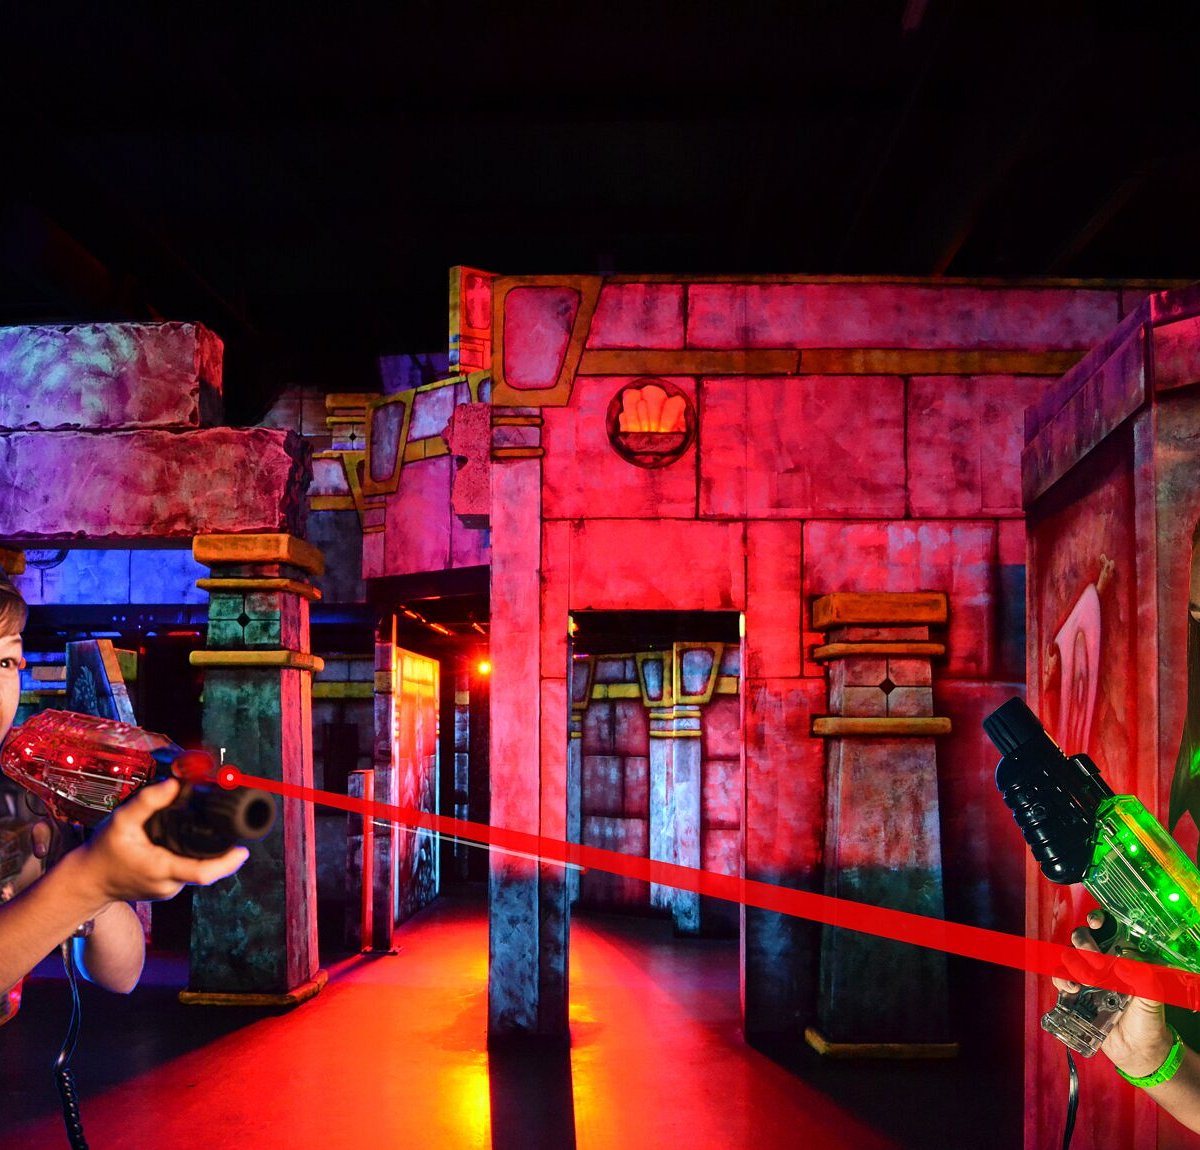 Places to hold laser tag games - articles